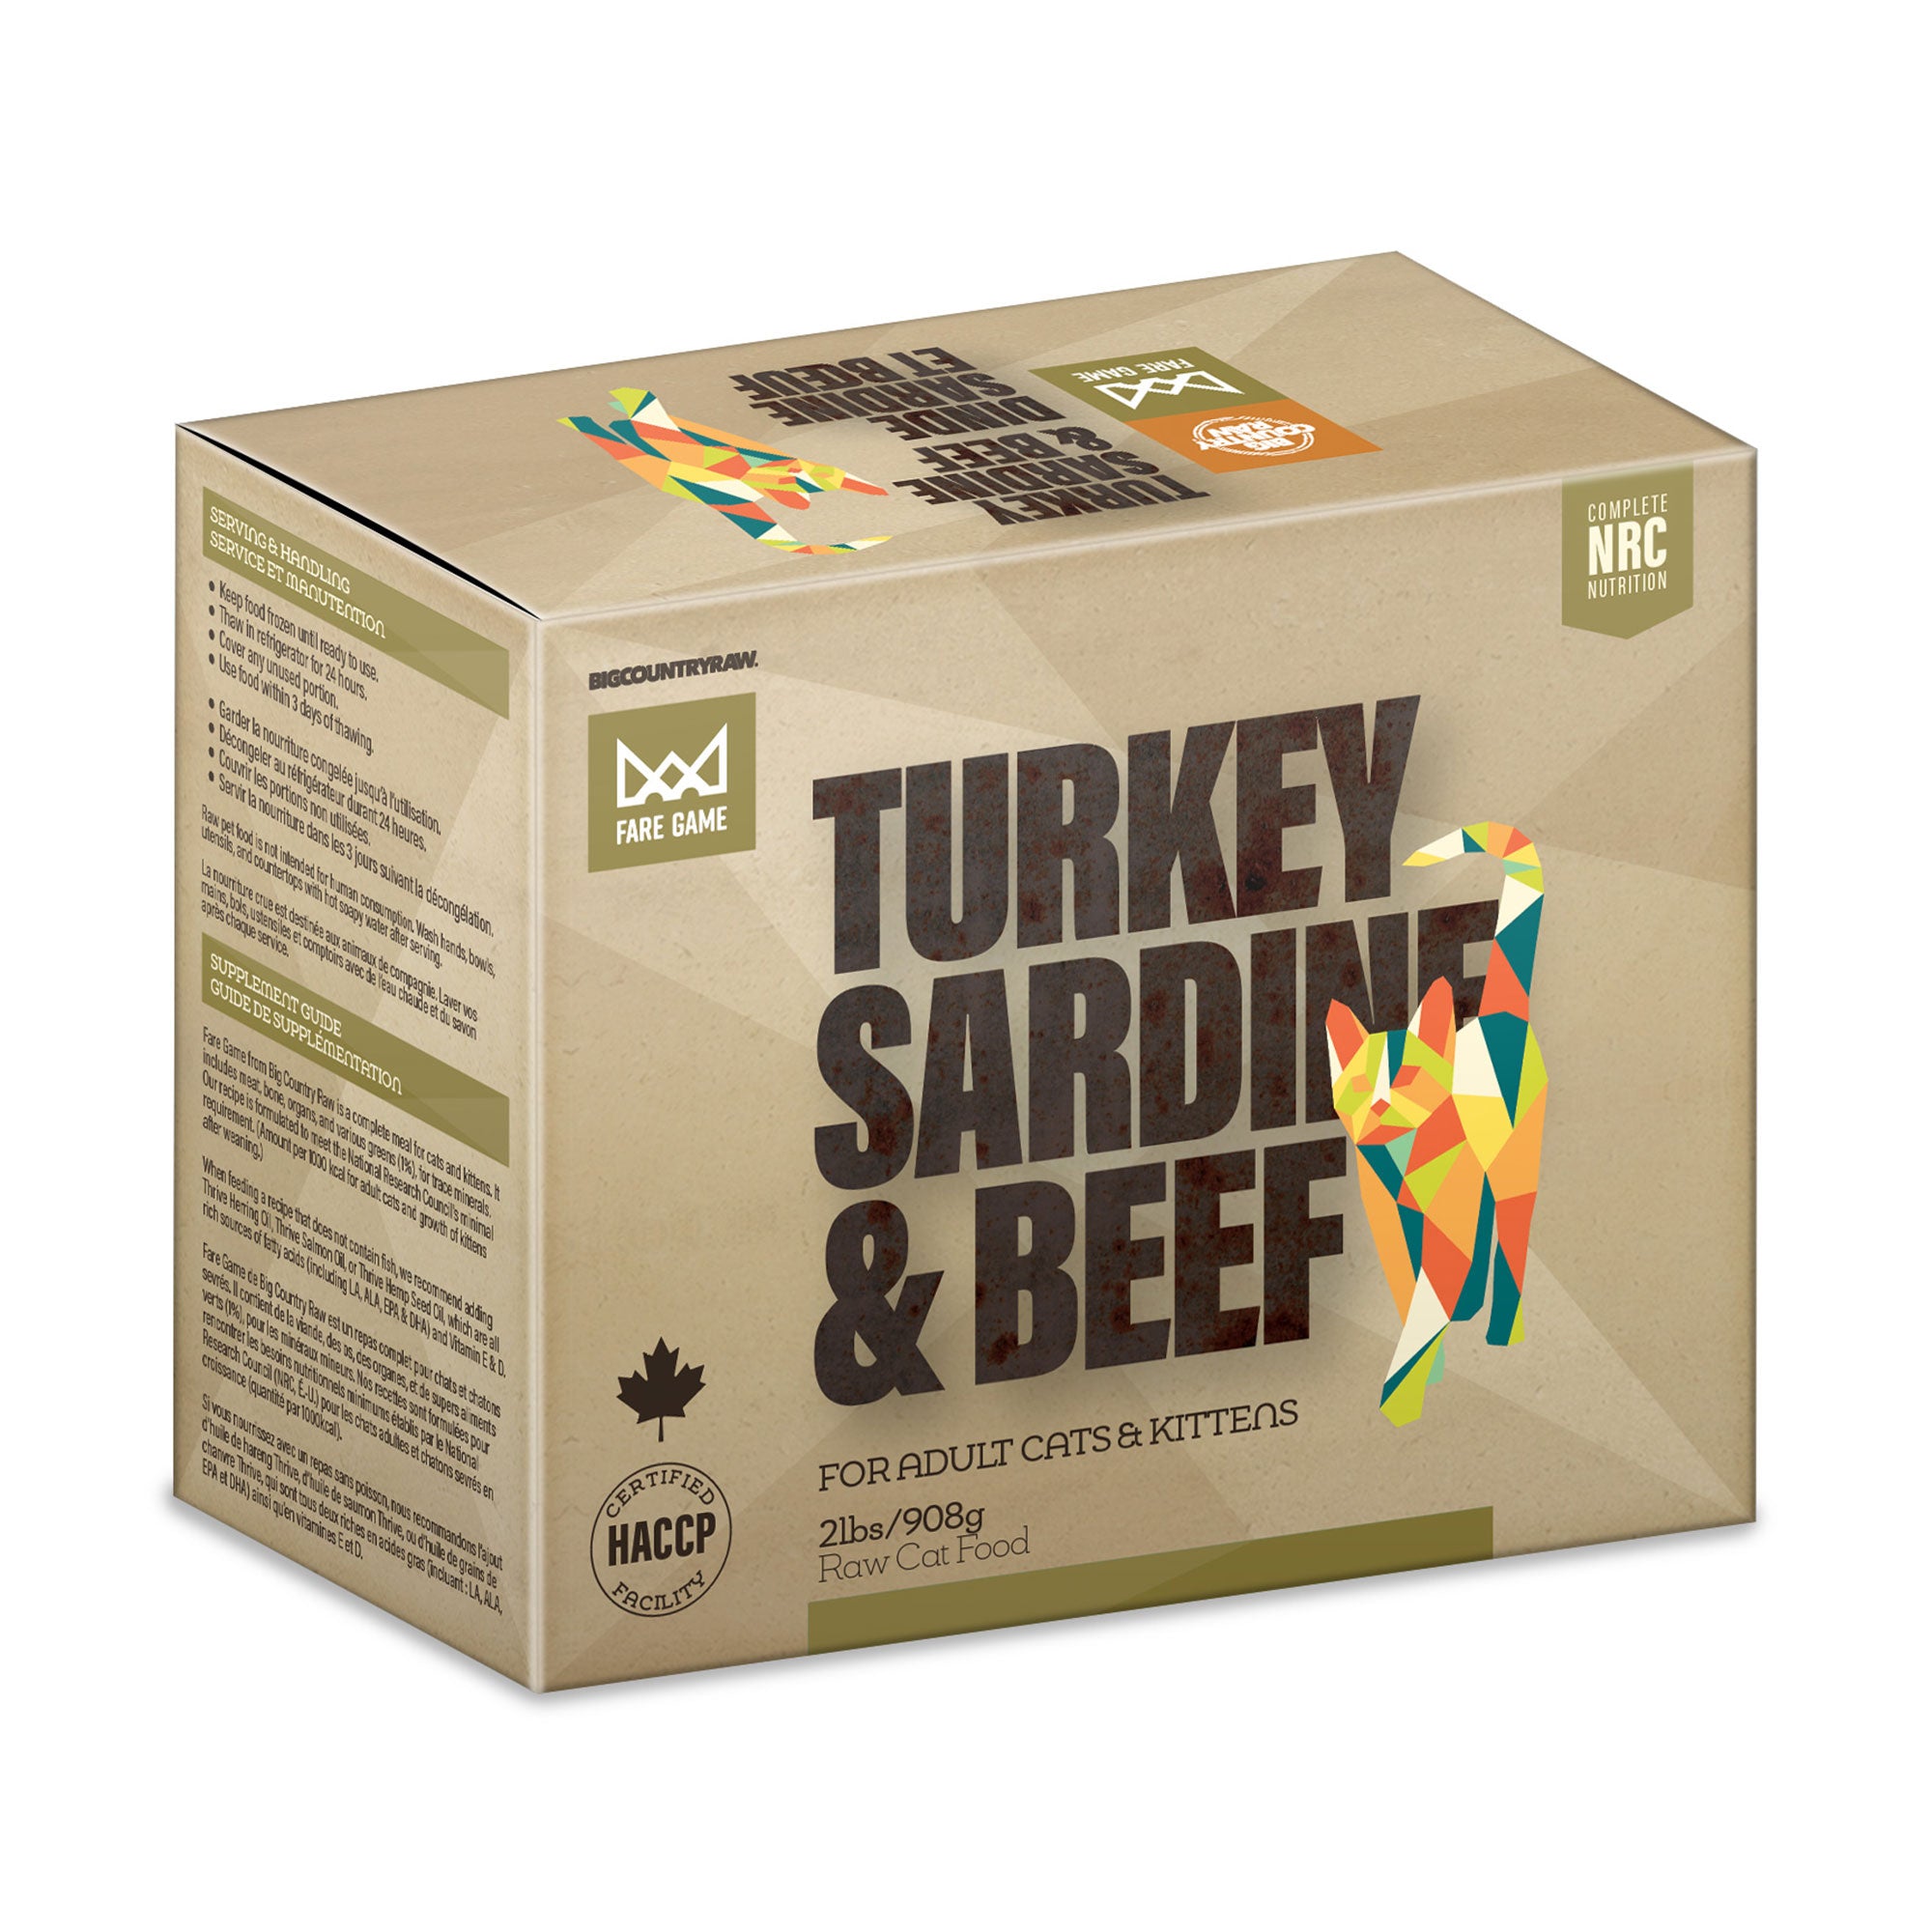 Big Country Raw | Fare Game | Turkey & Sardines with Beef (2lb) | Frozen Raw Cat Food